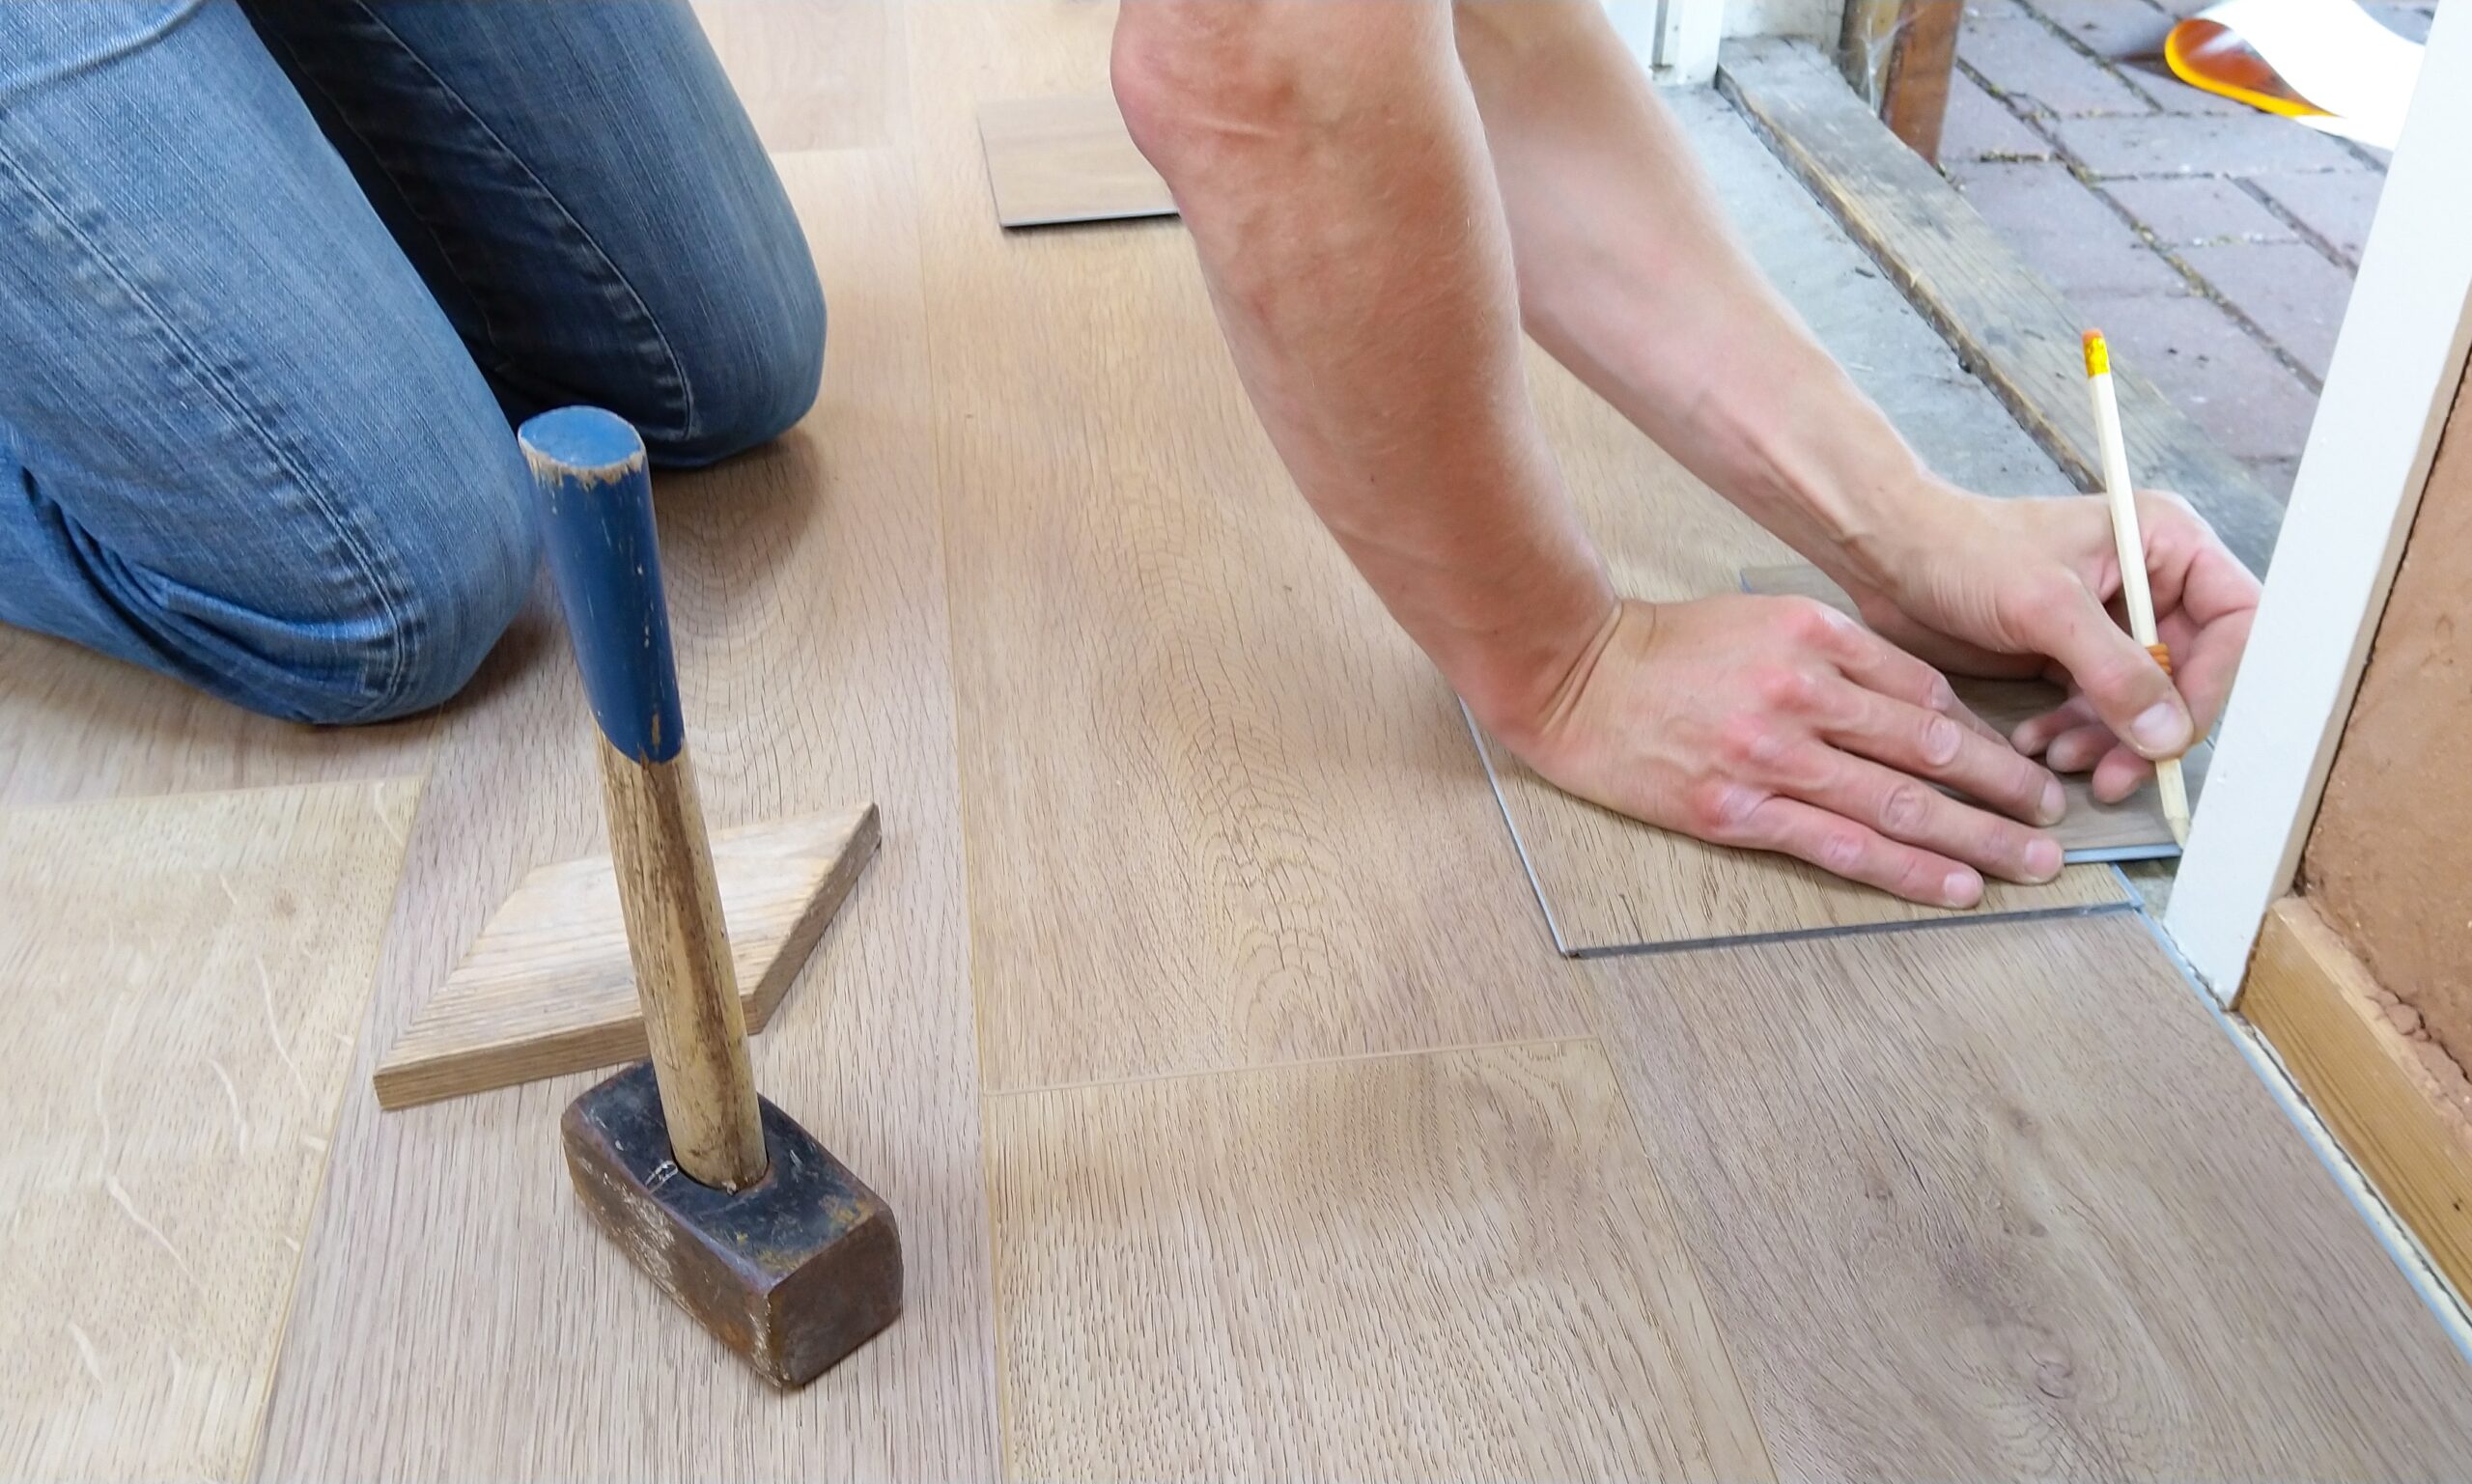 A person holding a pencil while installing vinyl floors